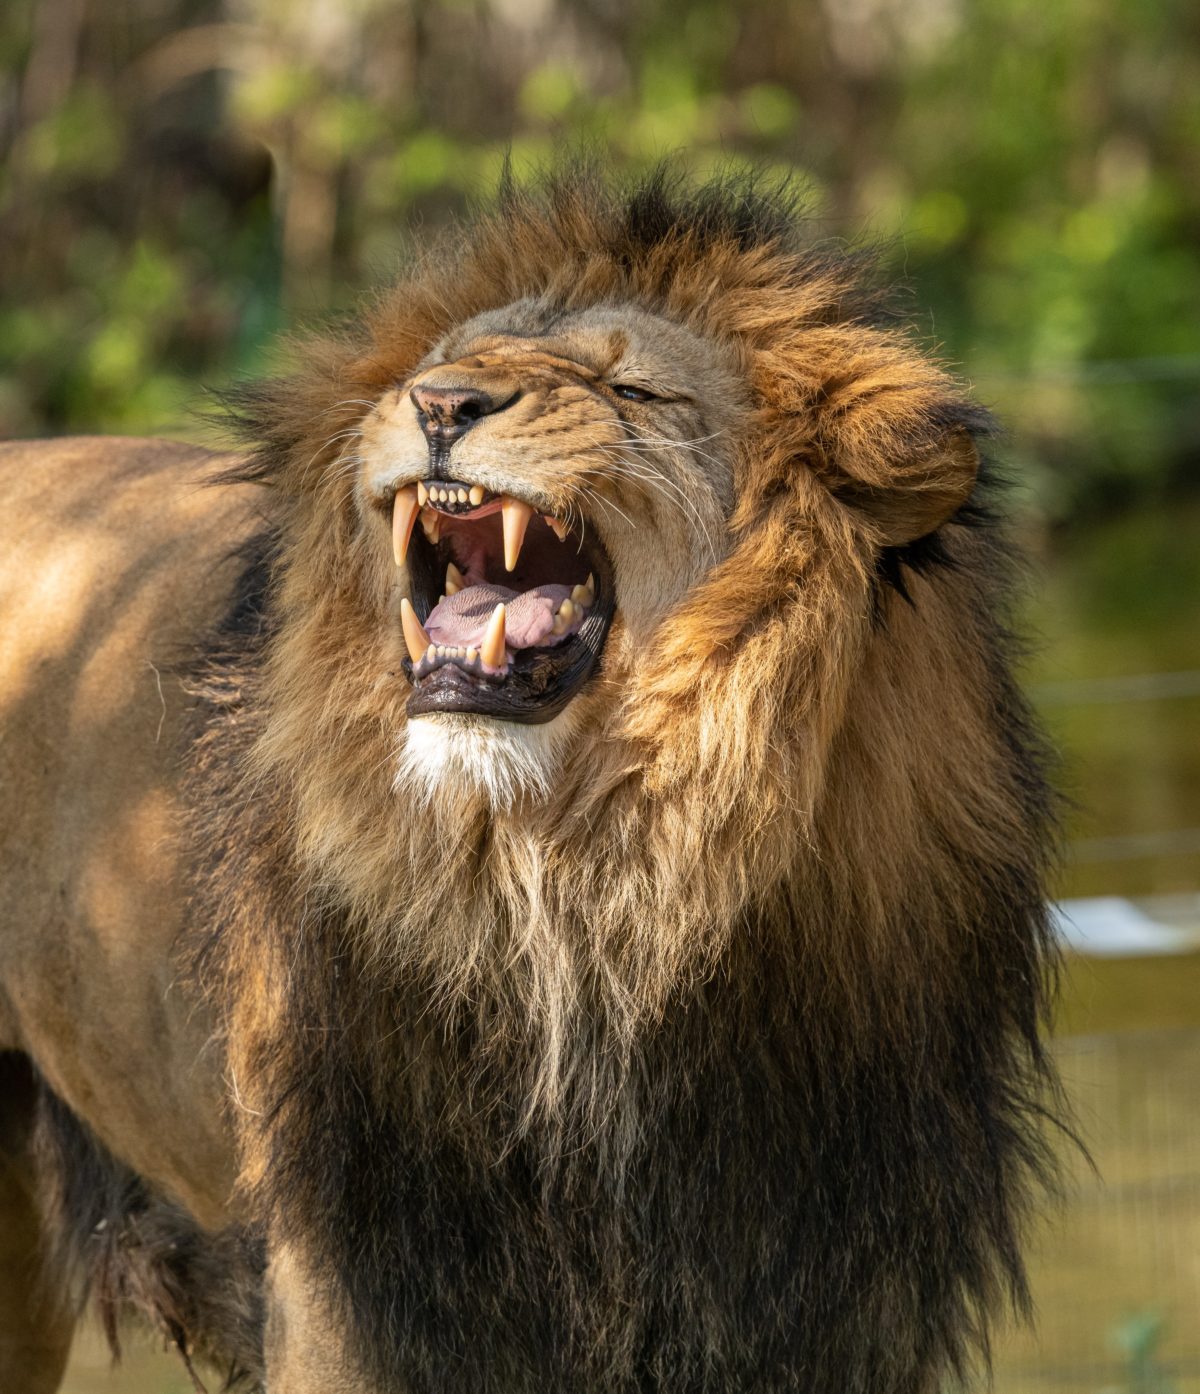 An angry looking, roaring lion.